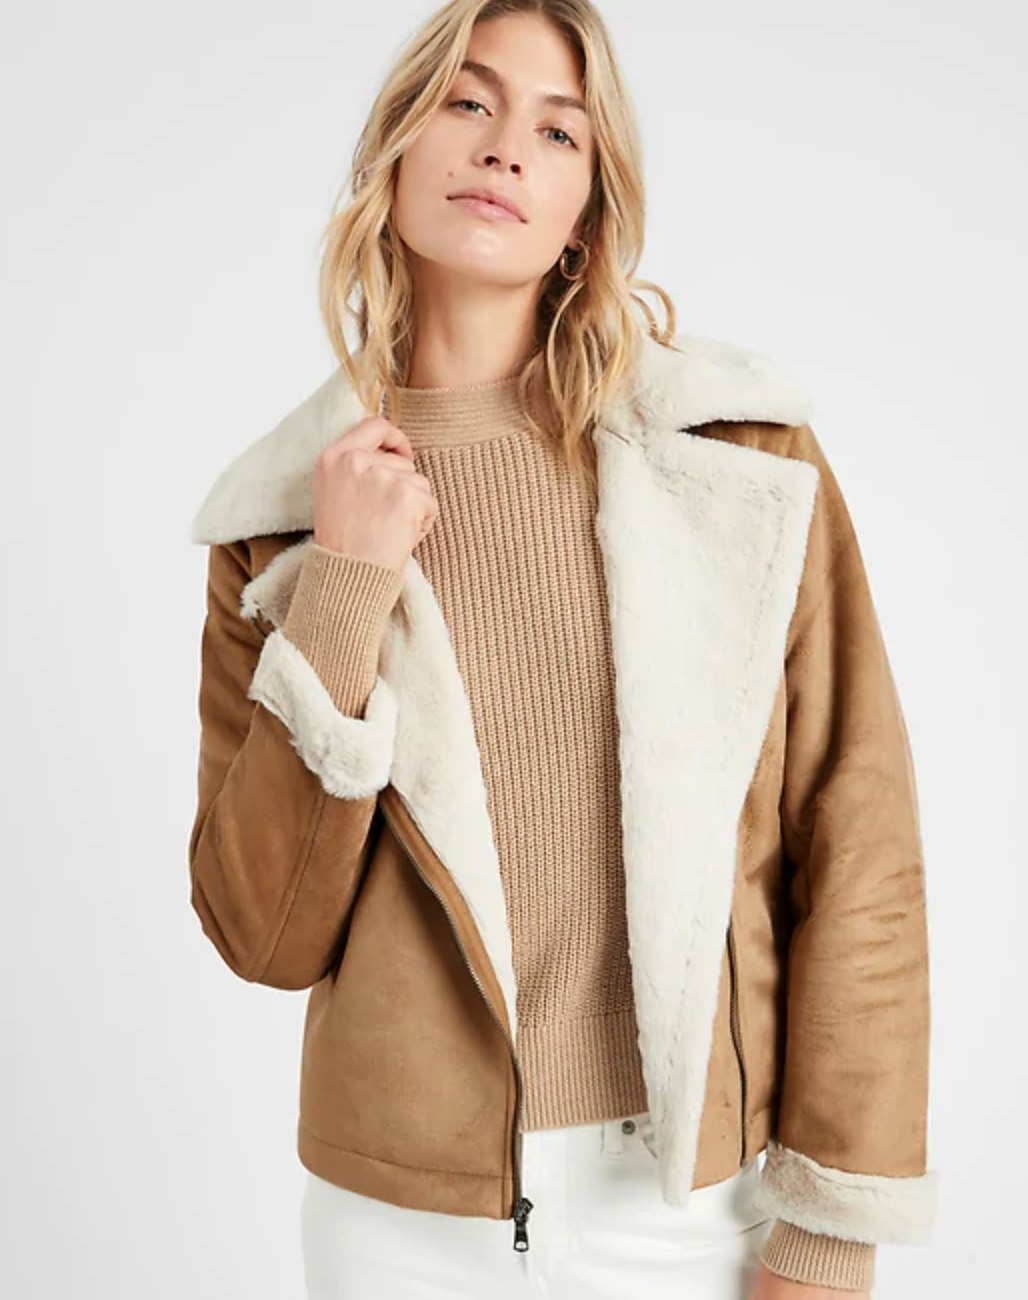 The faux shearling moto jacket in beige/ off-white